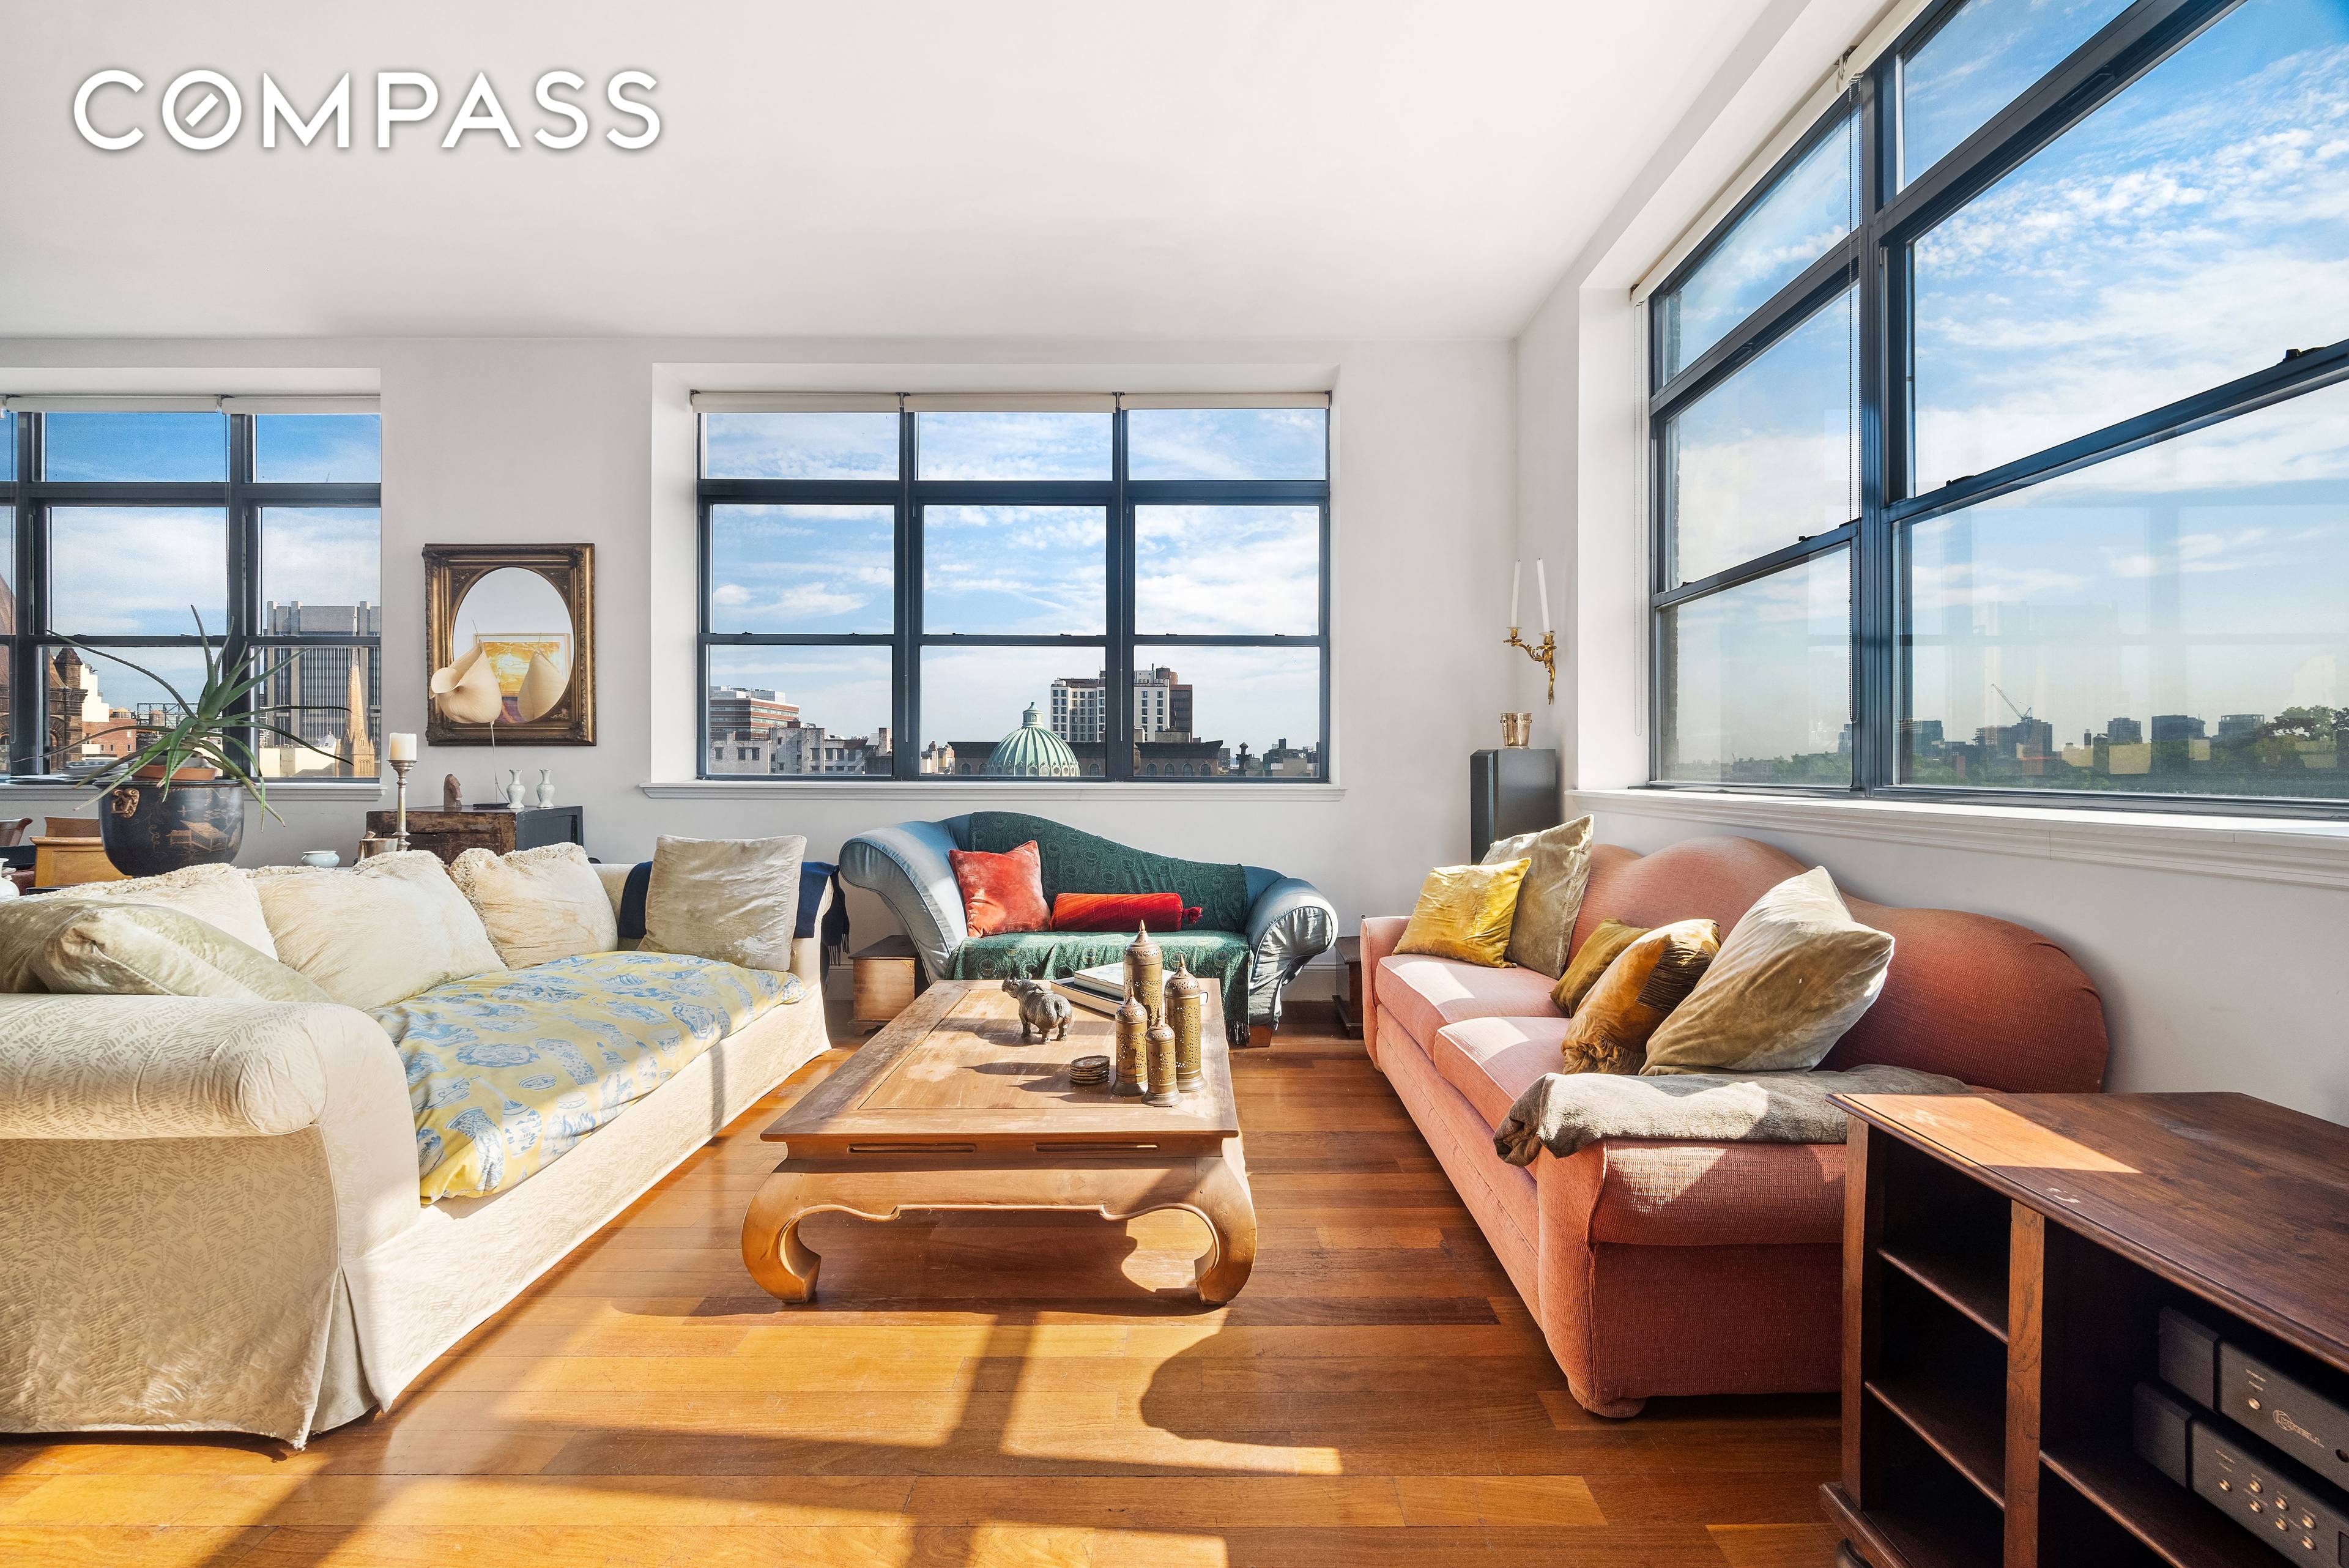 10 Mount Morris Park Unit 7 is a stunning duplex penthouse apartment with panoramic park and skyline views, a large private terrace, and over 1, 700 square feet of living ...